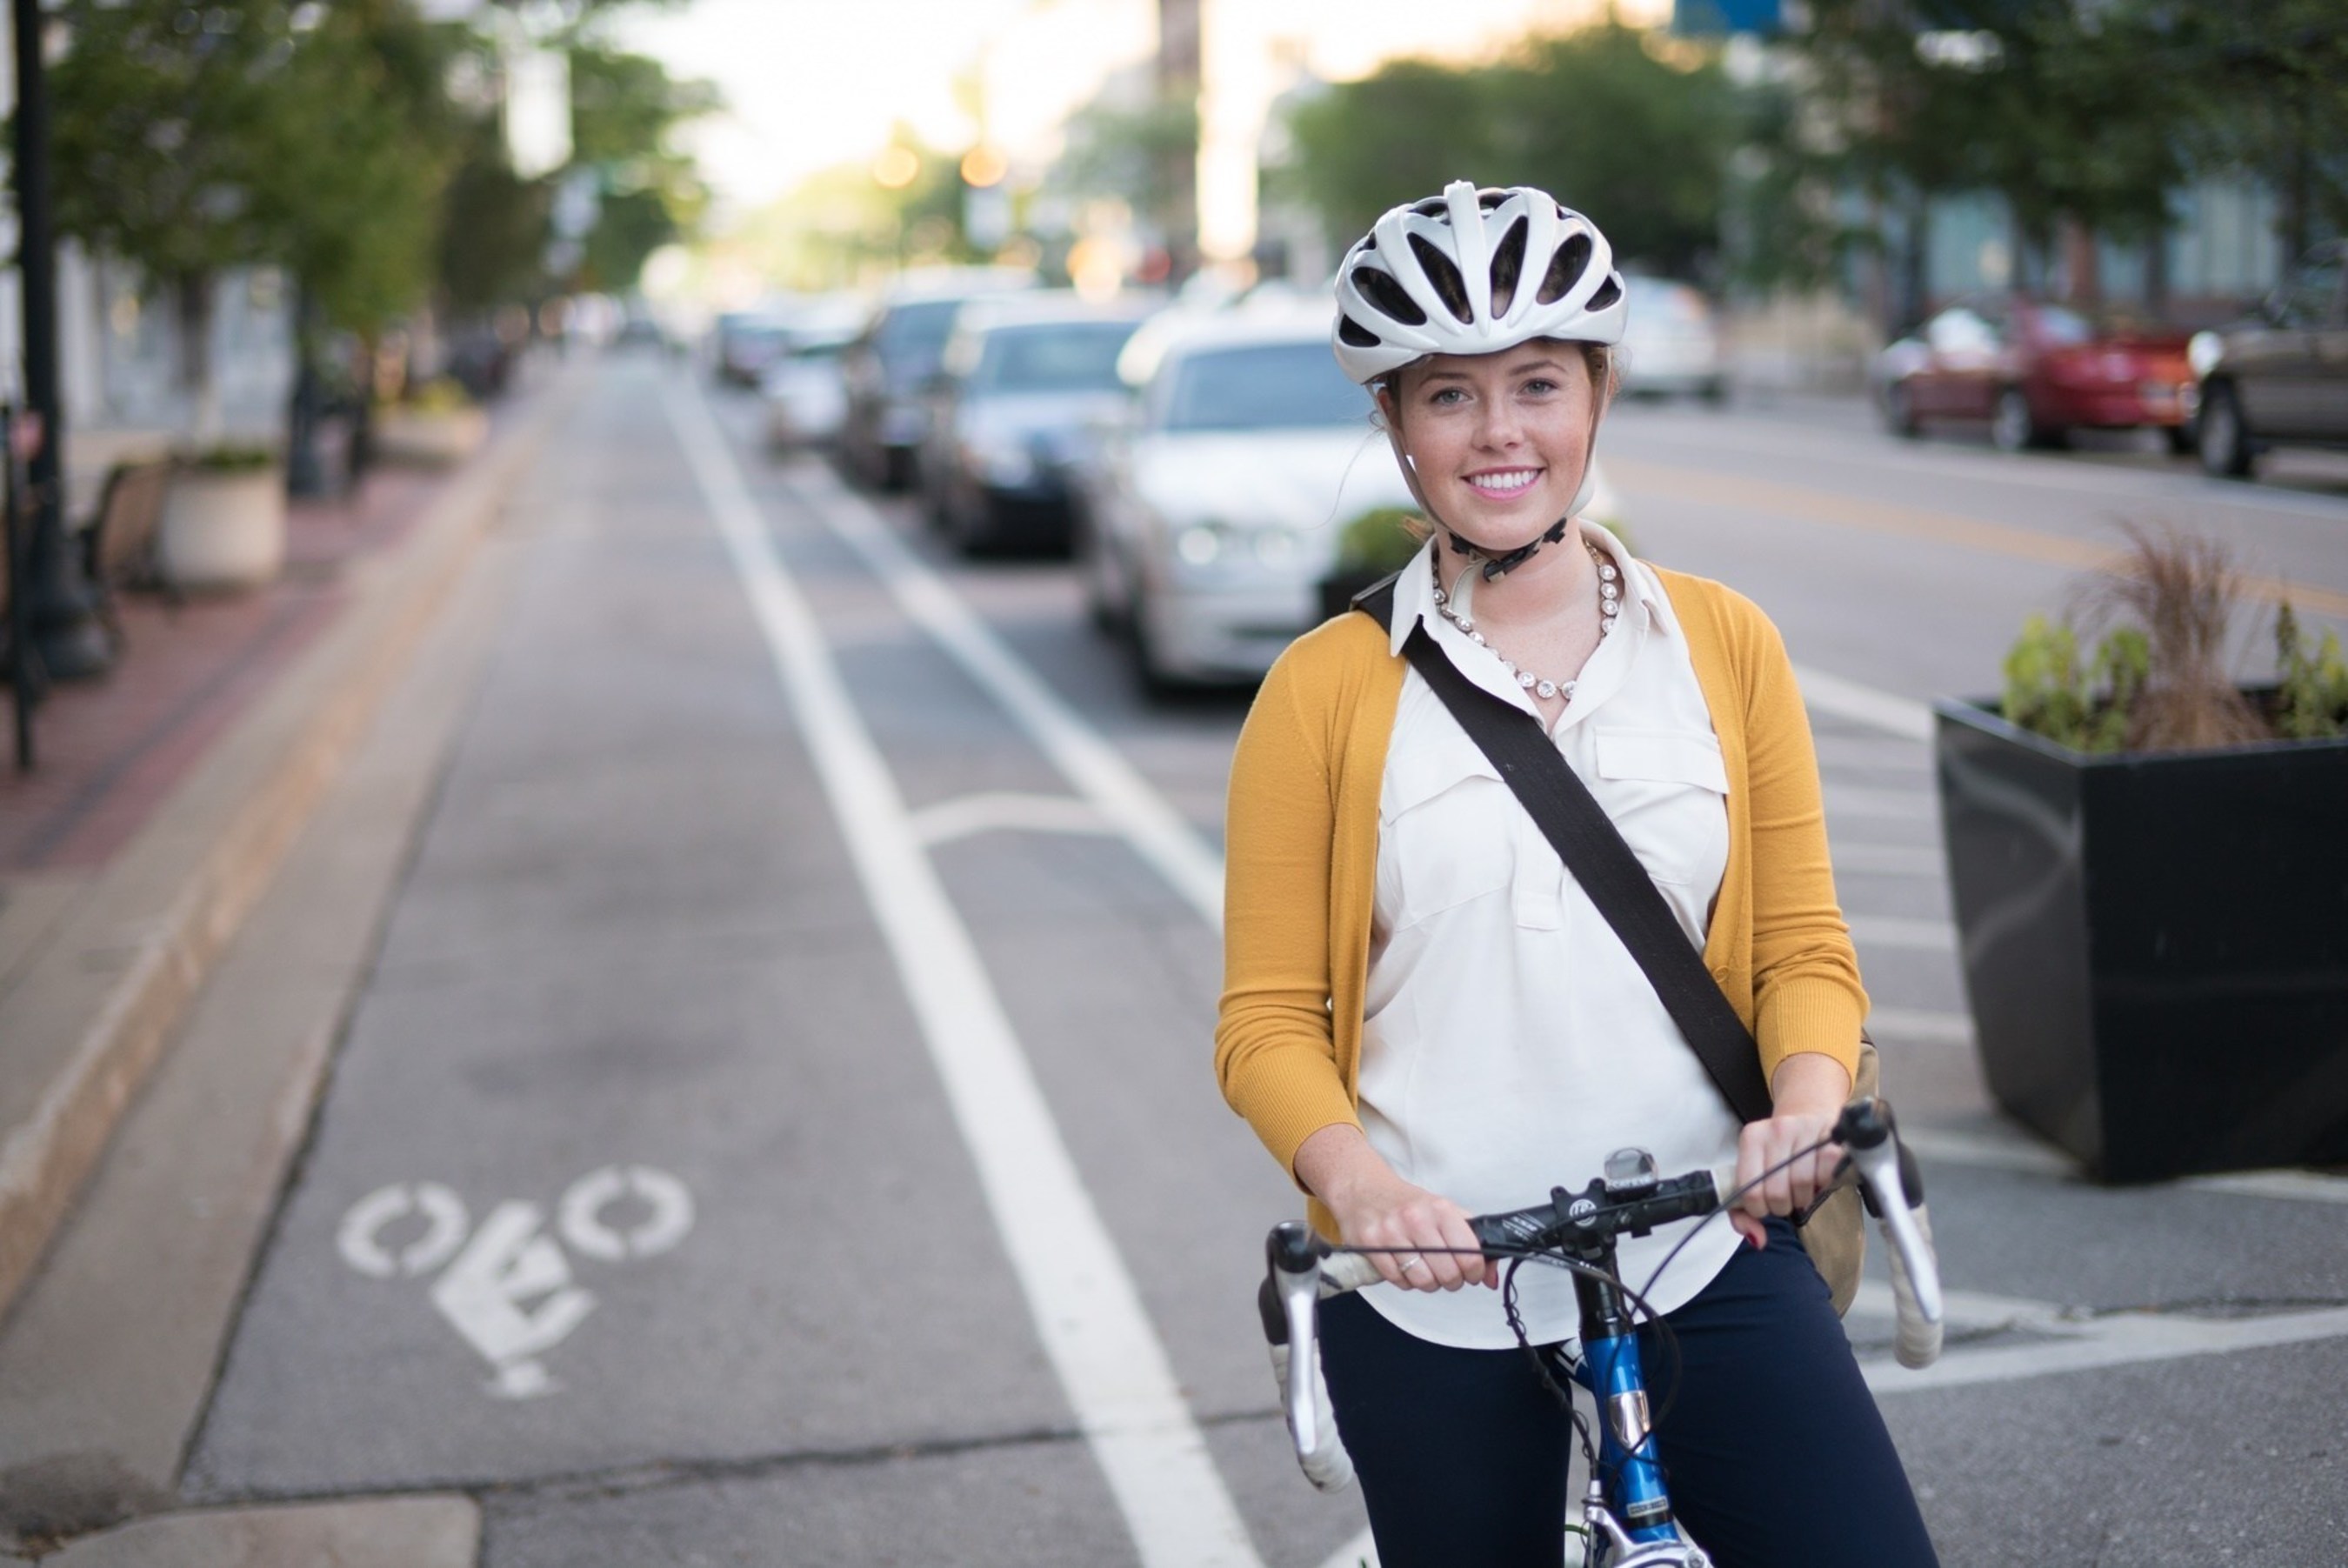 Katie Ramsey commutes along 3rd Street in Cedar Rapids, Iowa. With support from Blue Zones Project, Cedar Rapids introduced one of Iowa's first protected bike lanes in 2015.